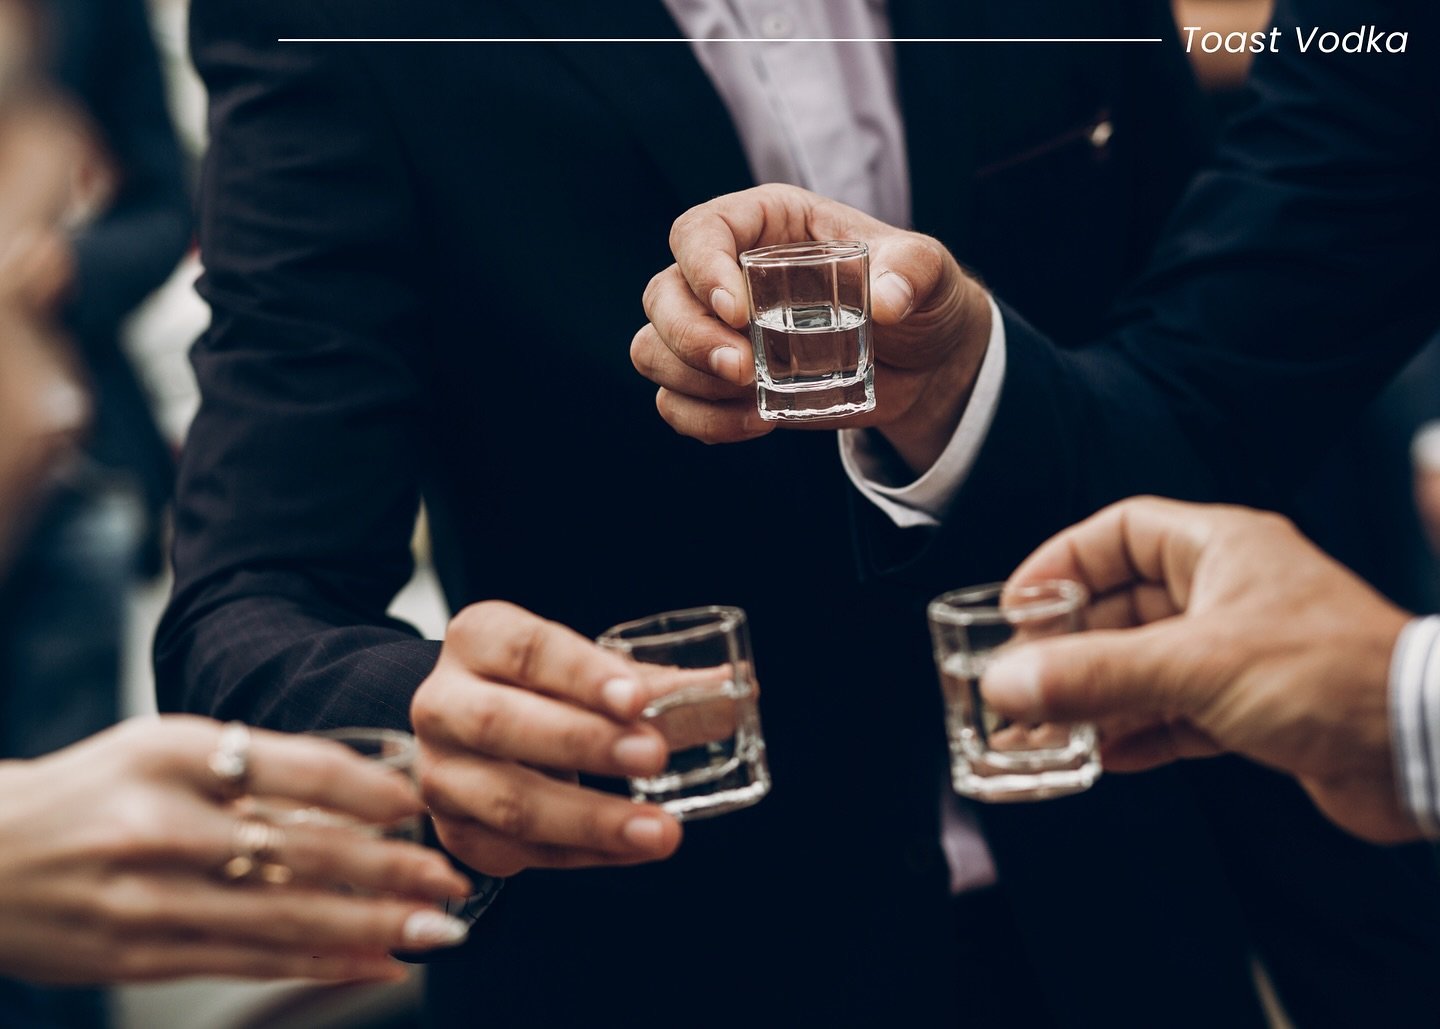 Turning meetings into celebrations, one shot of Toast Vodka at a happy hour meeting. Cheers to productive discussions and smooth sips! 🍸

 #HappyHourMeetings #explore #toastvodka #ToastToSuccess